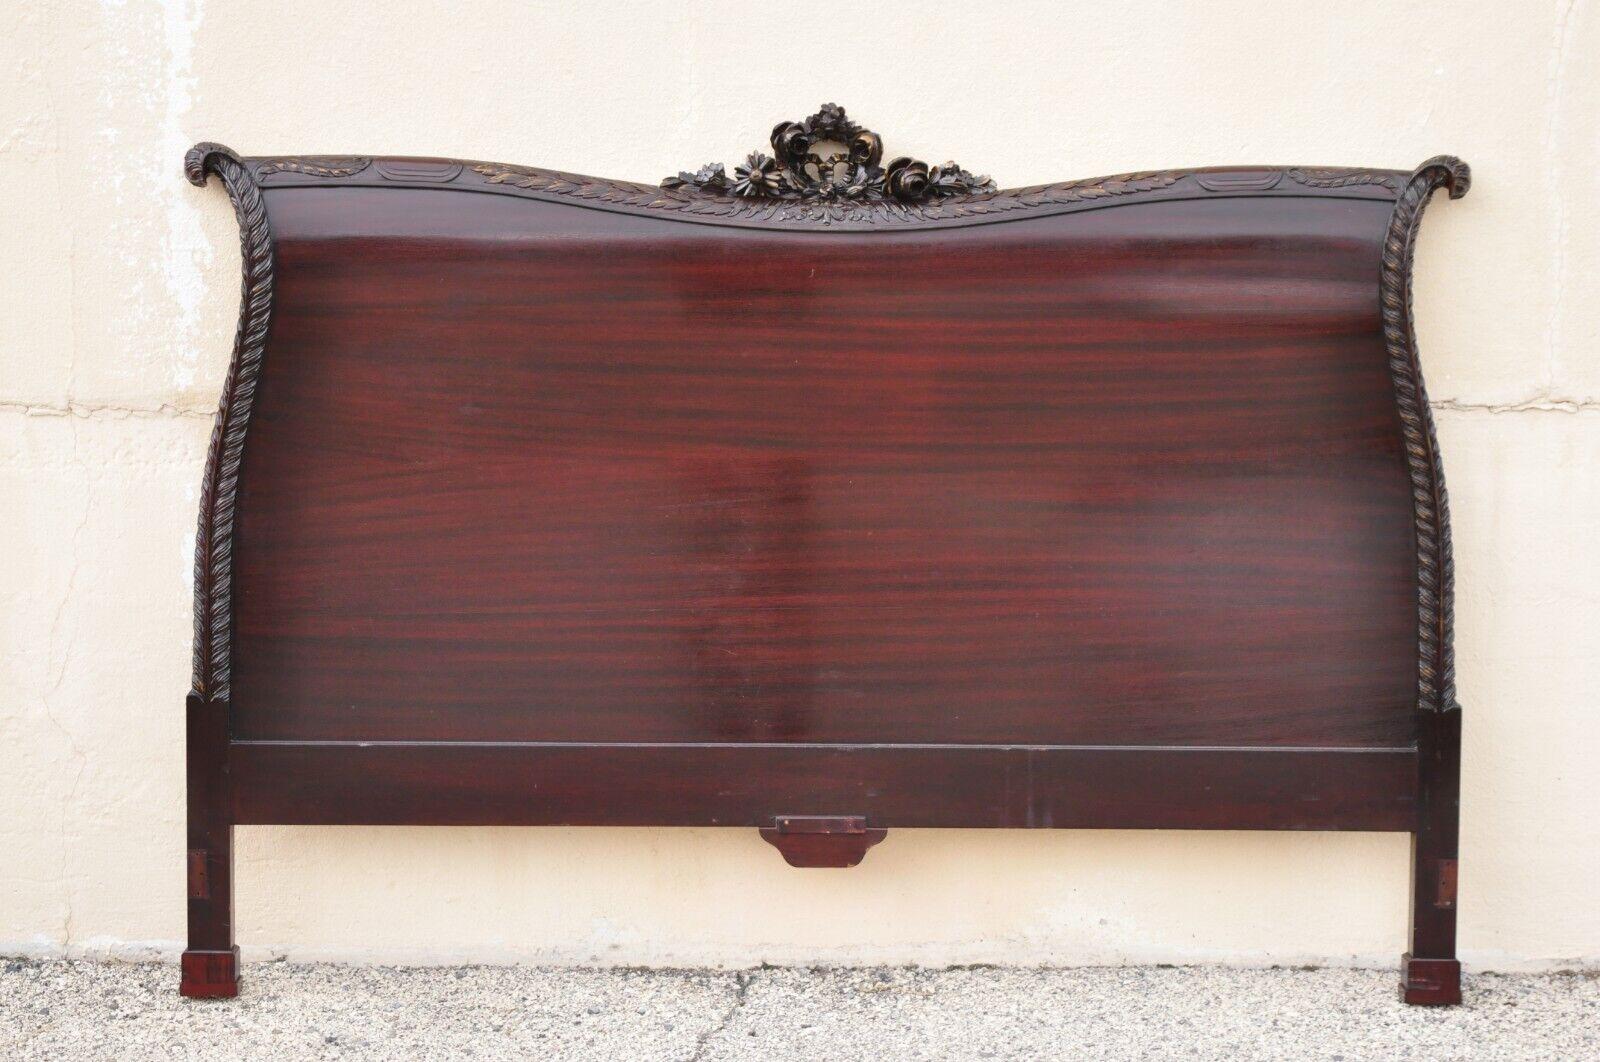 Mahogany carved plume feather prince of wales king size bed headboard. Item features finely carved plume details, floral carved pediment, beautiful wood grain, very nice vintage item, great style and form, does not include metal frame. Circa Early